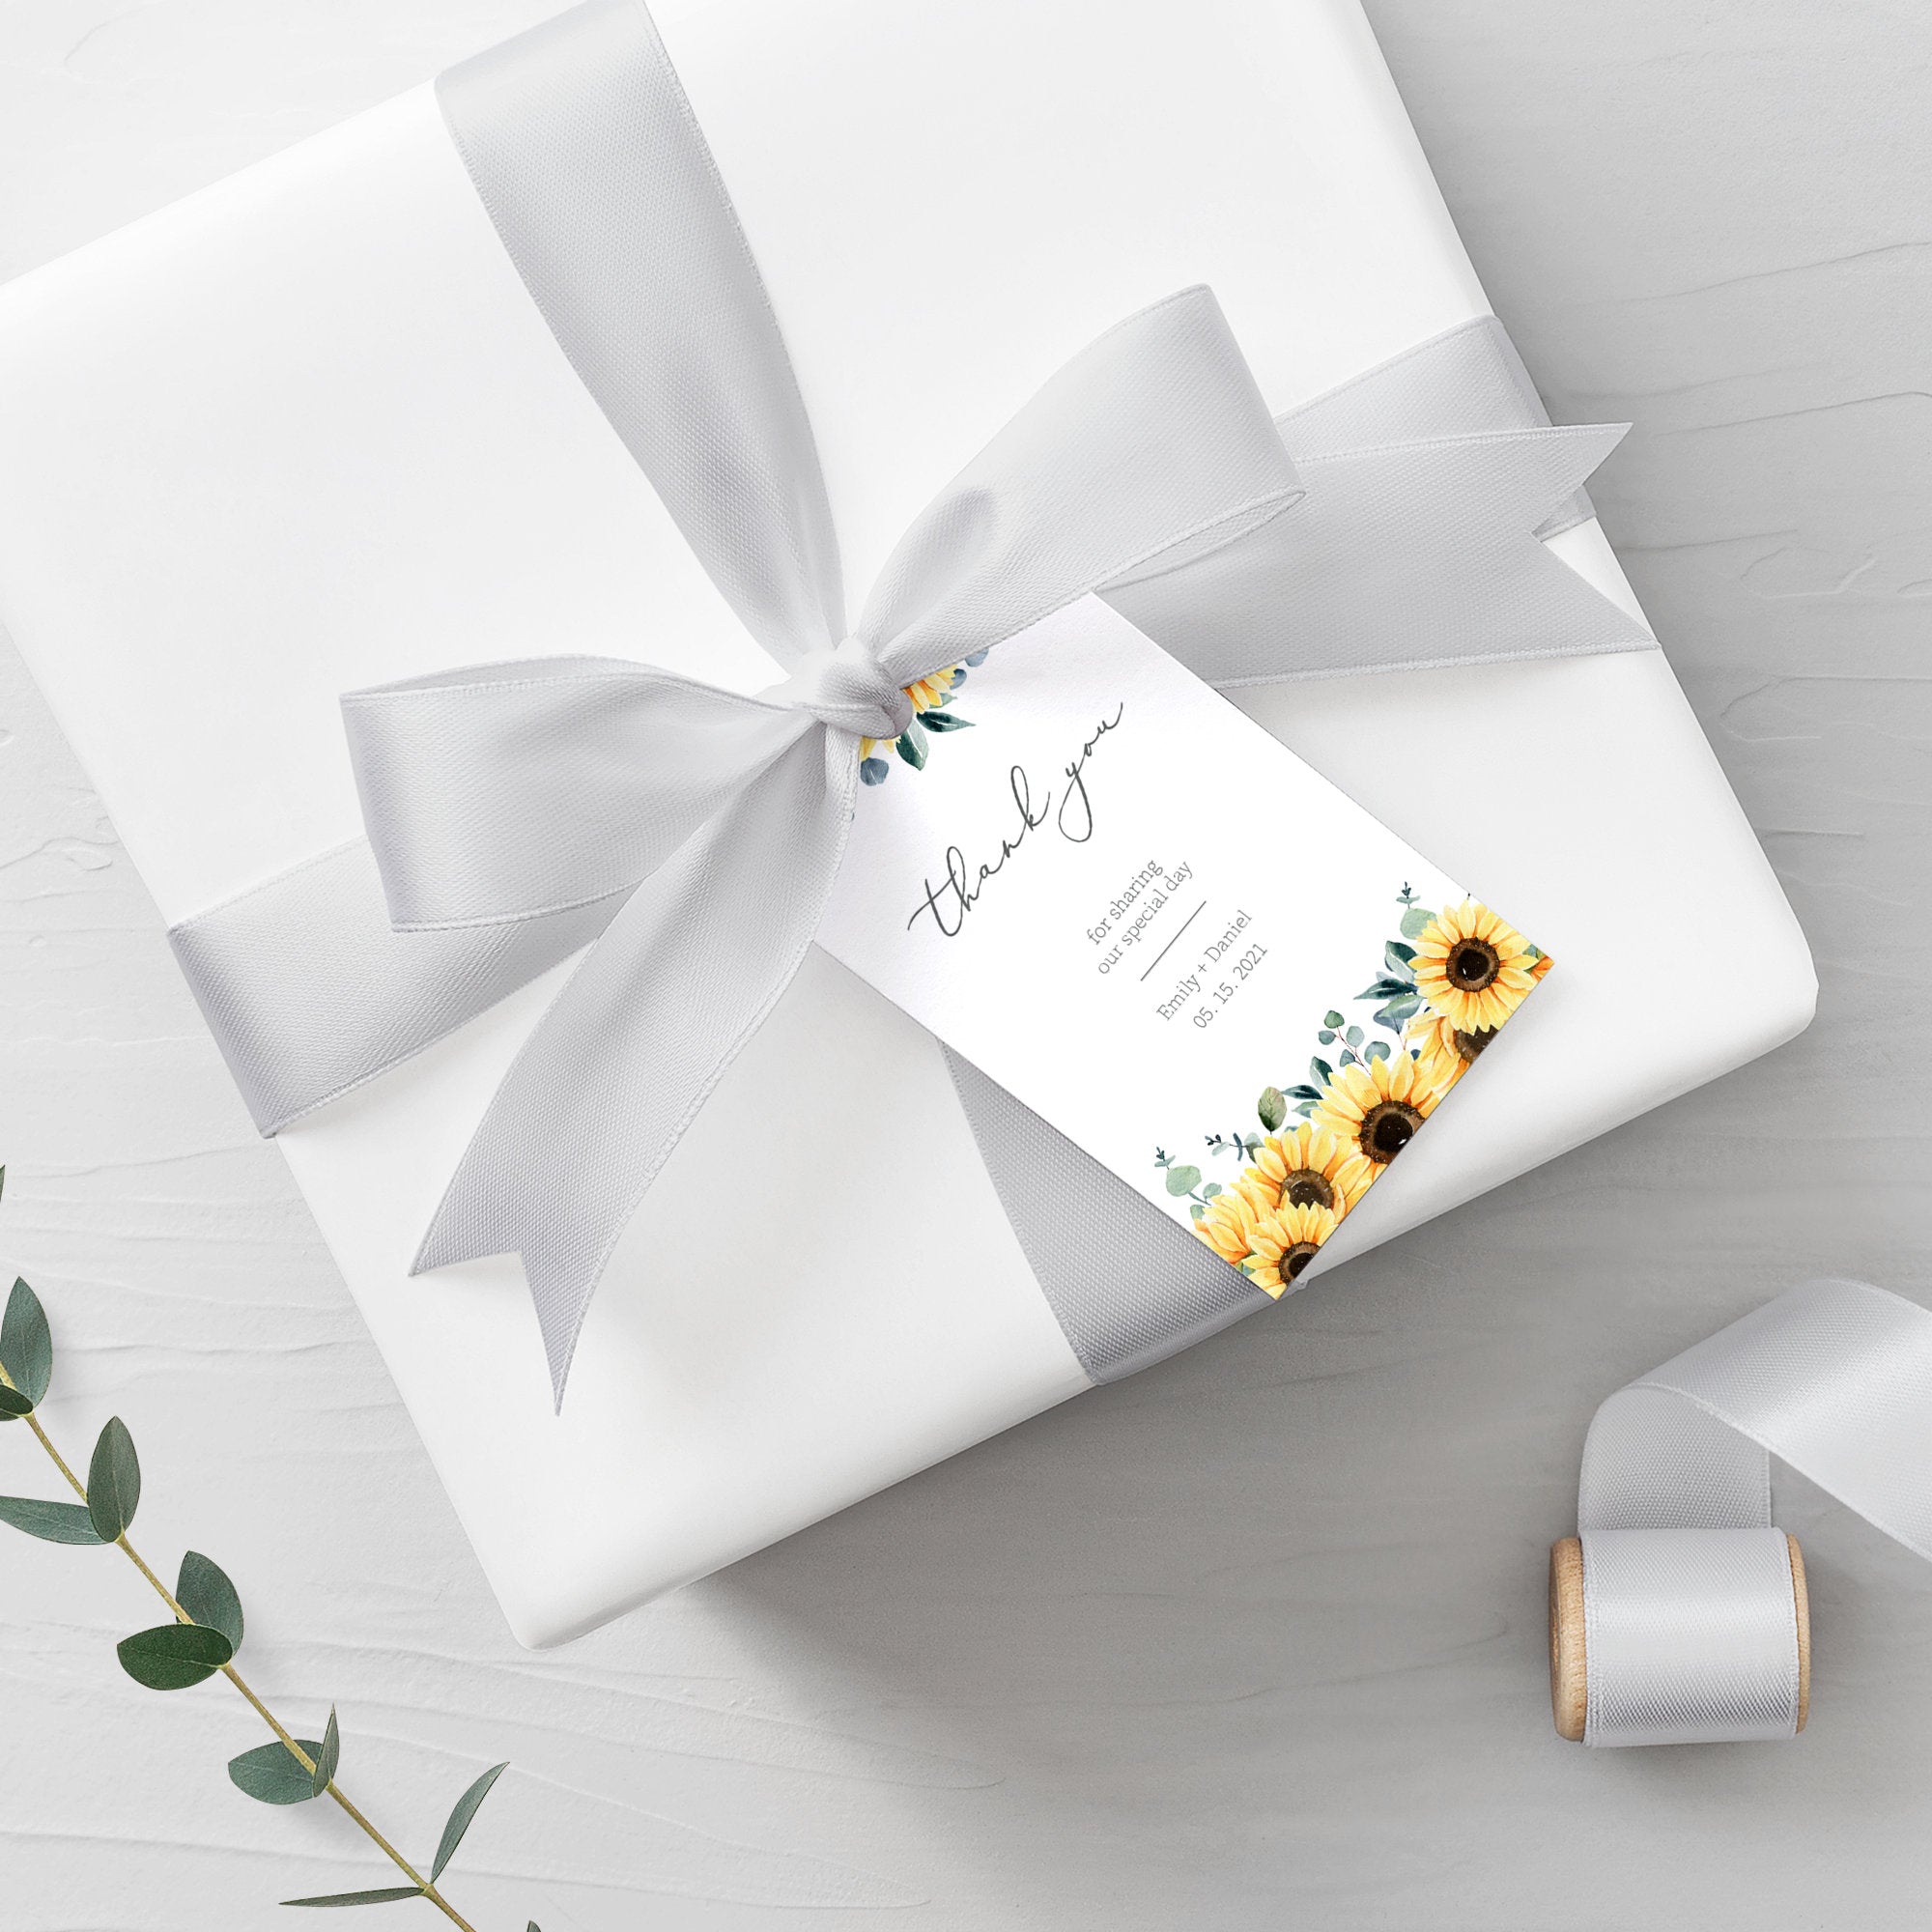 Personalized Sunflower Wedding Favor Tags For Candles, Printable Sunflower Thank You Tags for Wedding, Editable DIGITAL DOWNLOAD S100